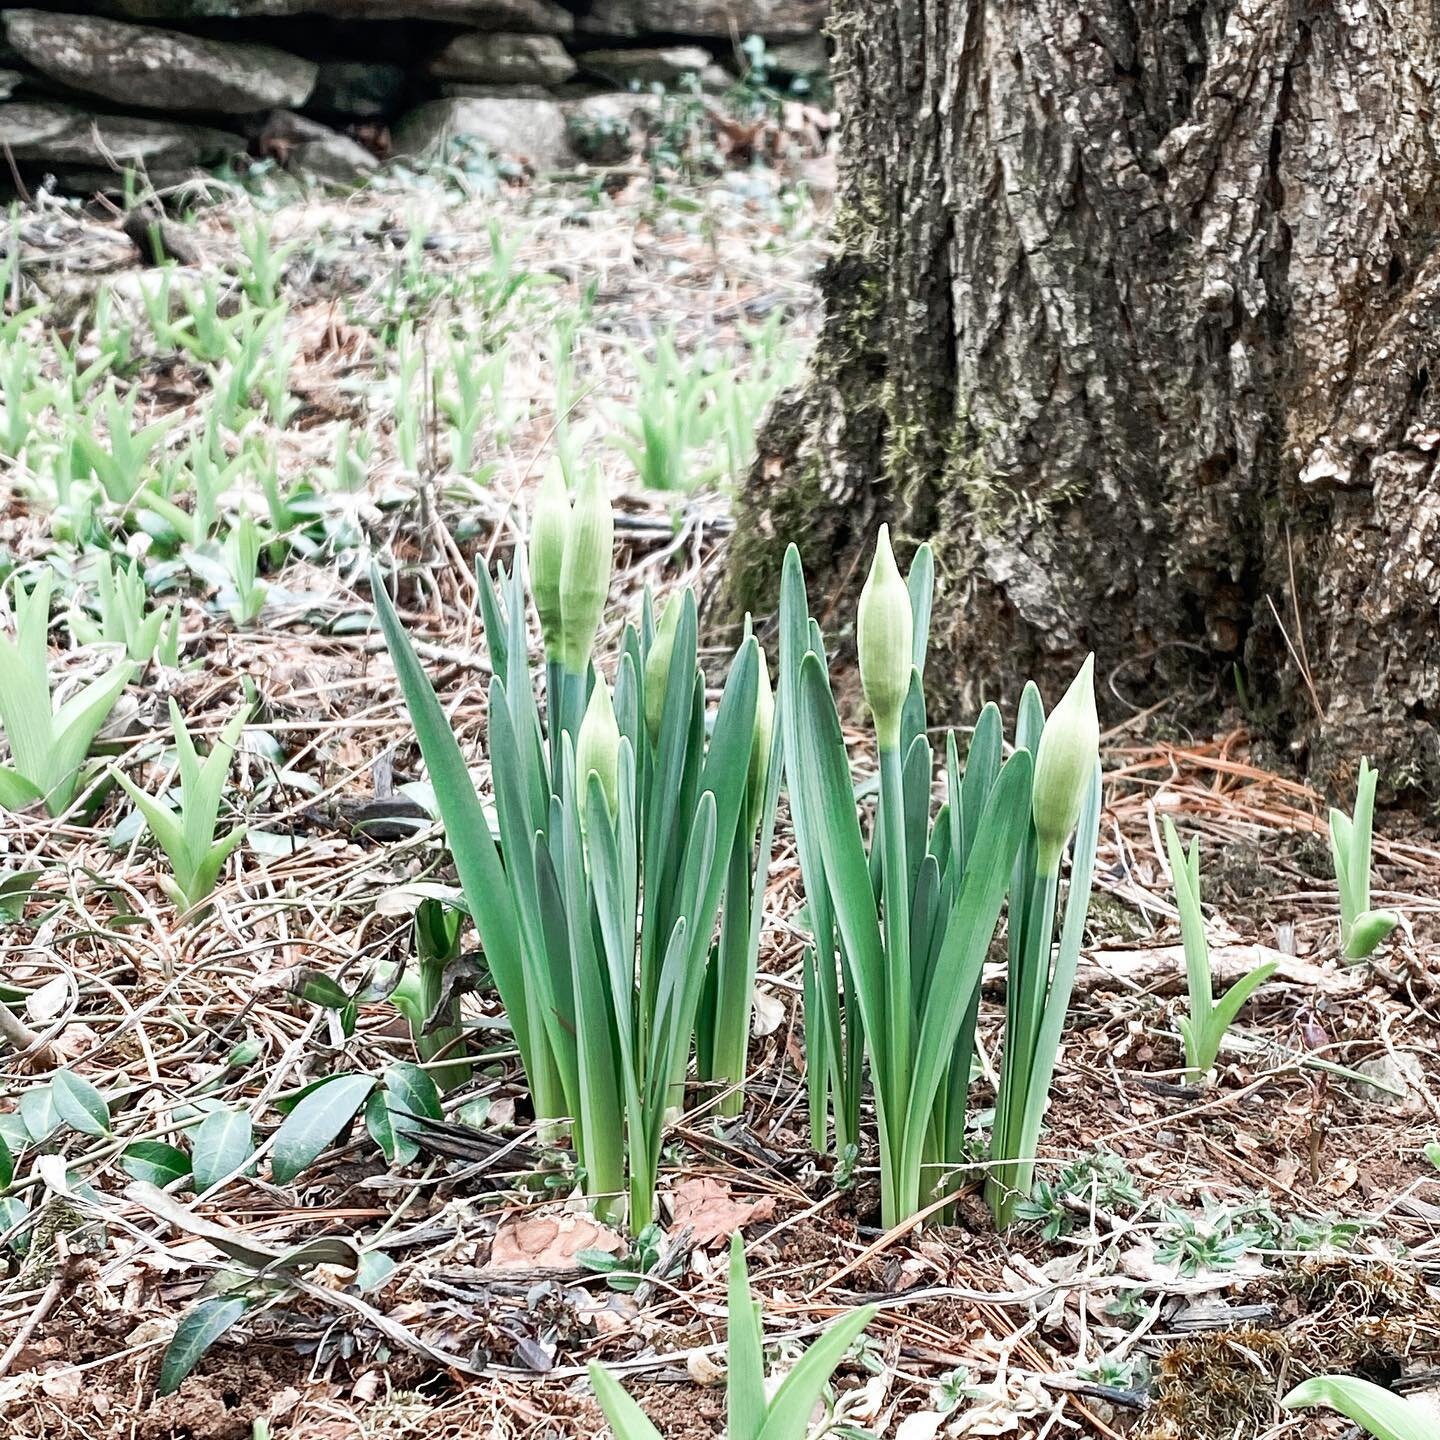 I came up last weekend hoping for signs of spring and I am happy to report, we found several flowers beds ready to give us a show over the next few months.  My guess is these will be orange (not the daffodils) but we will find out! 

Makes sense that